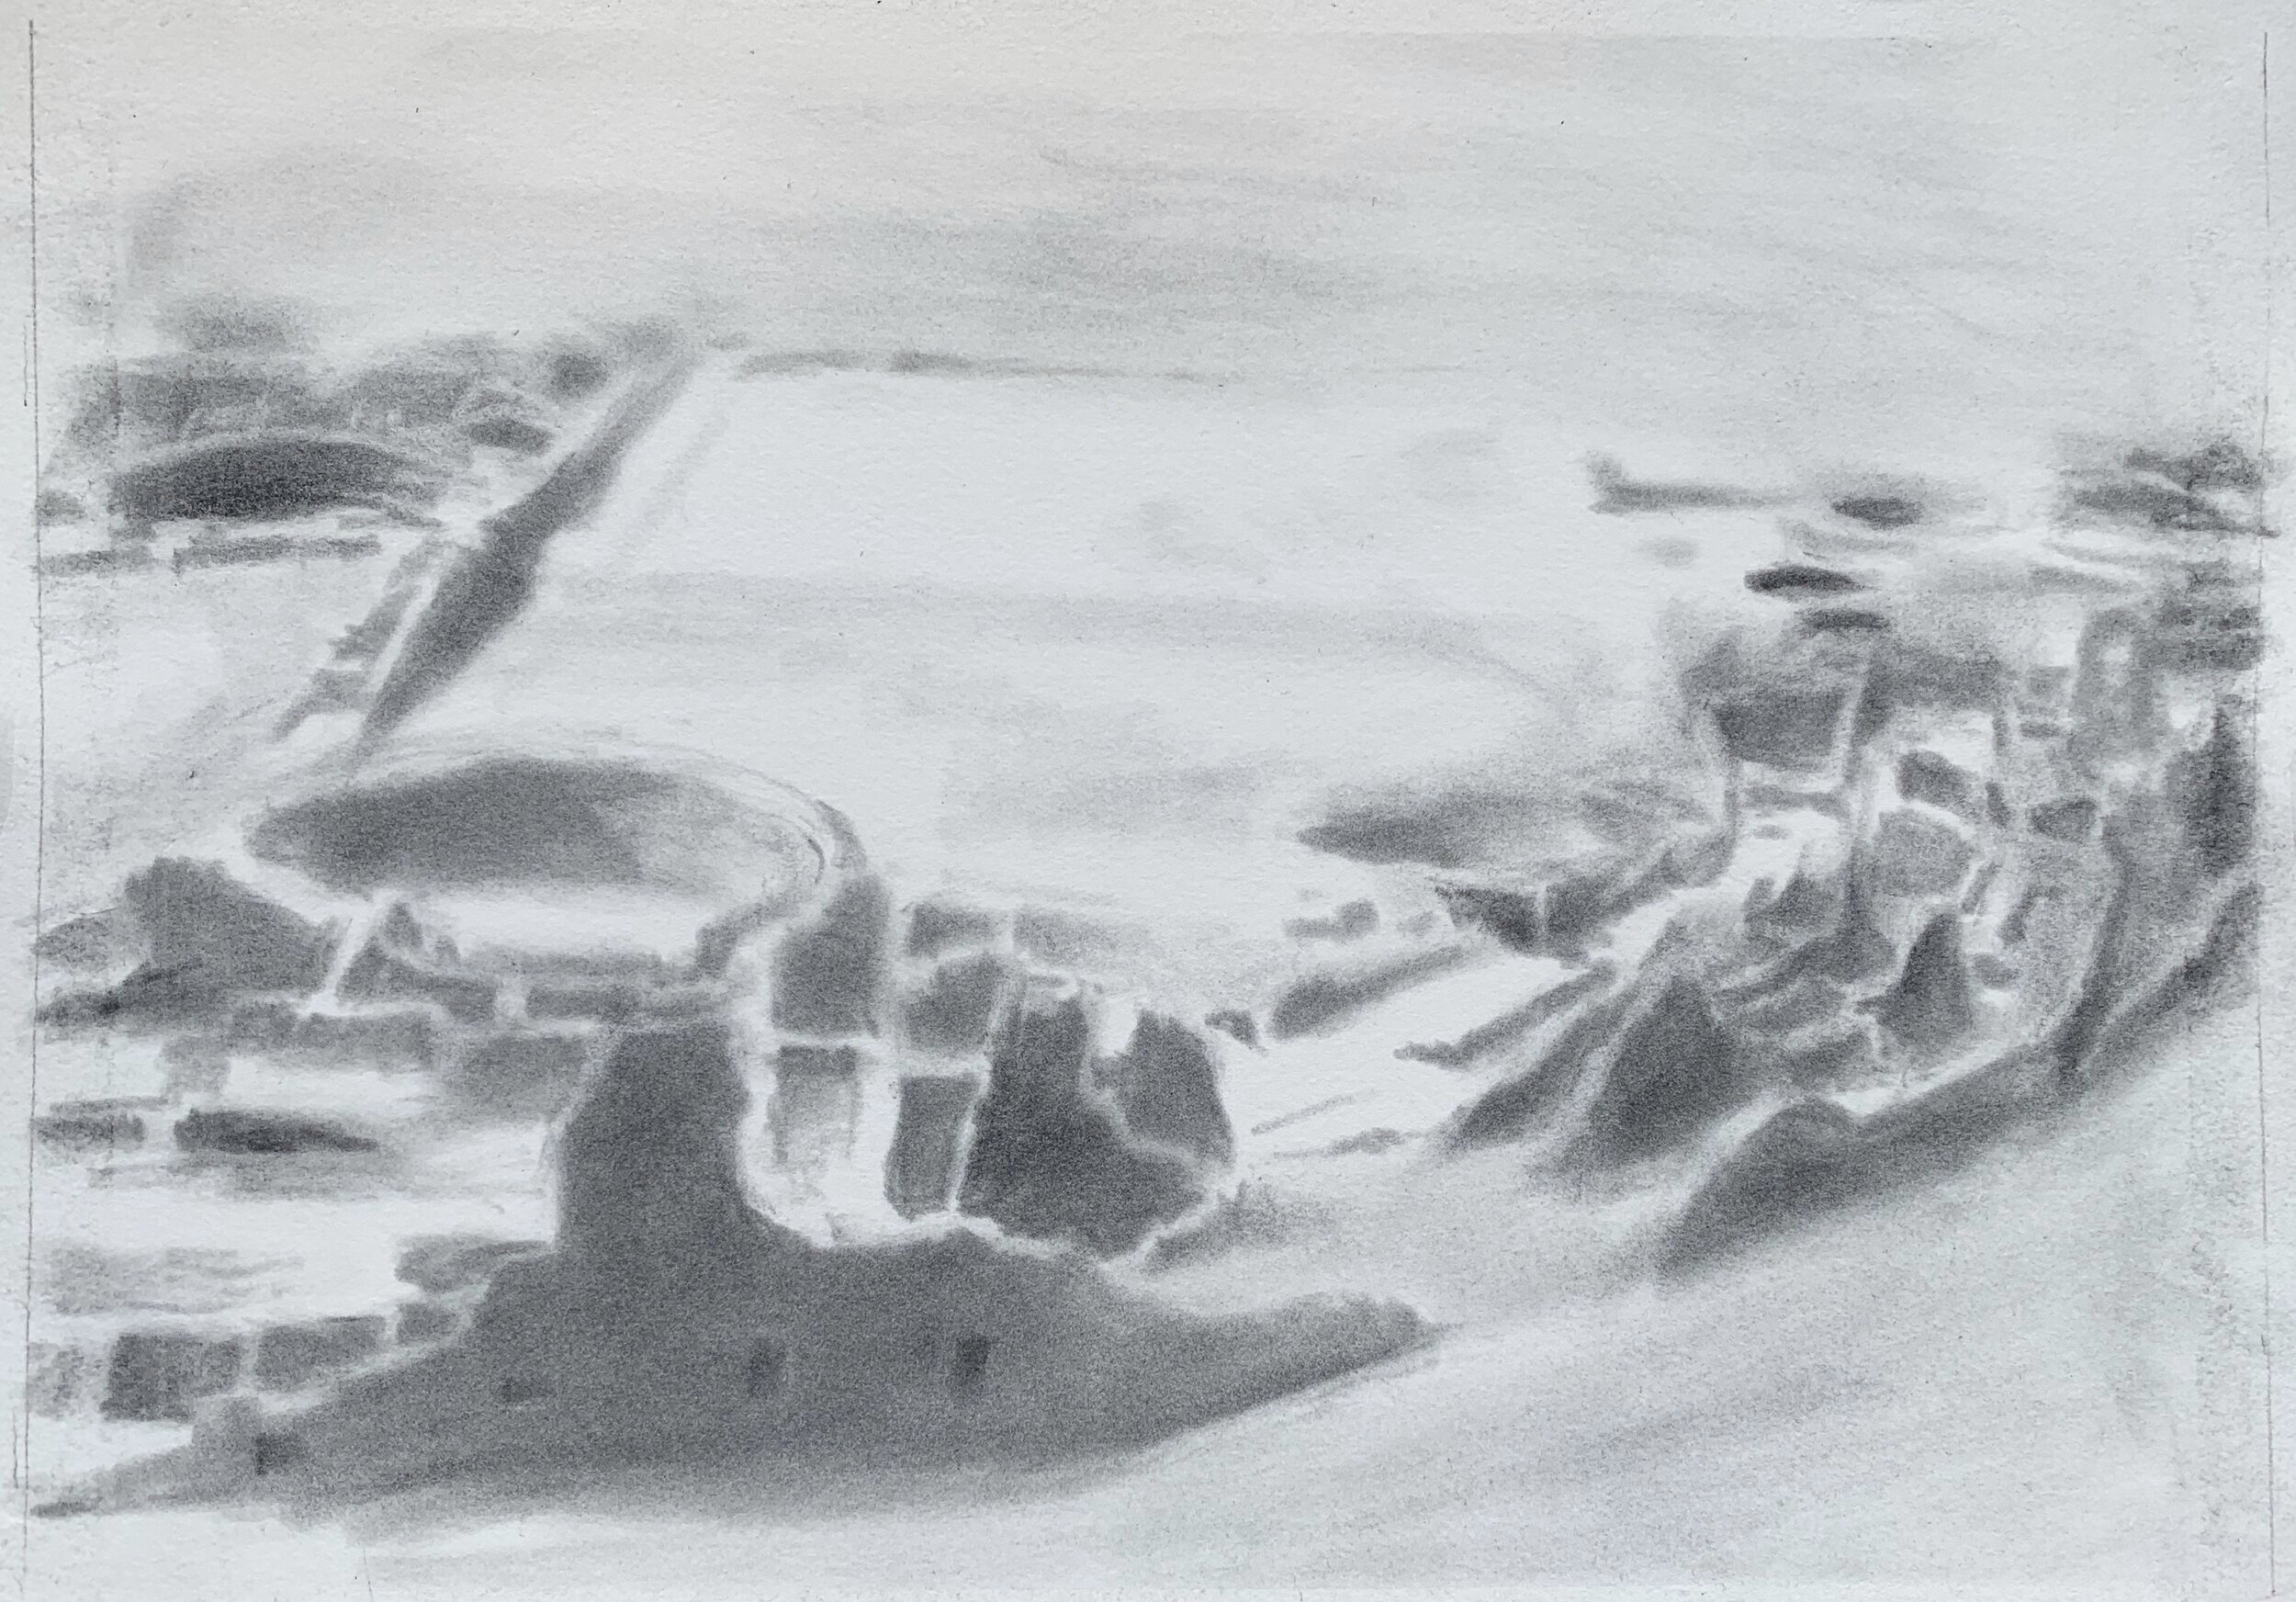   Chaco Study,  2019 graphite on paper, 9 x 13 in 